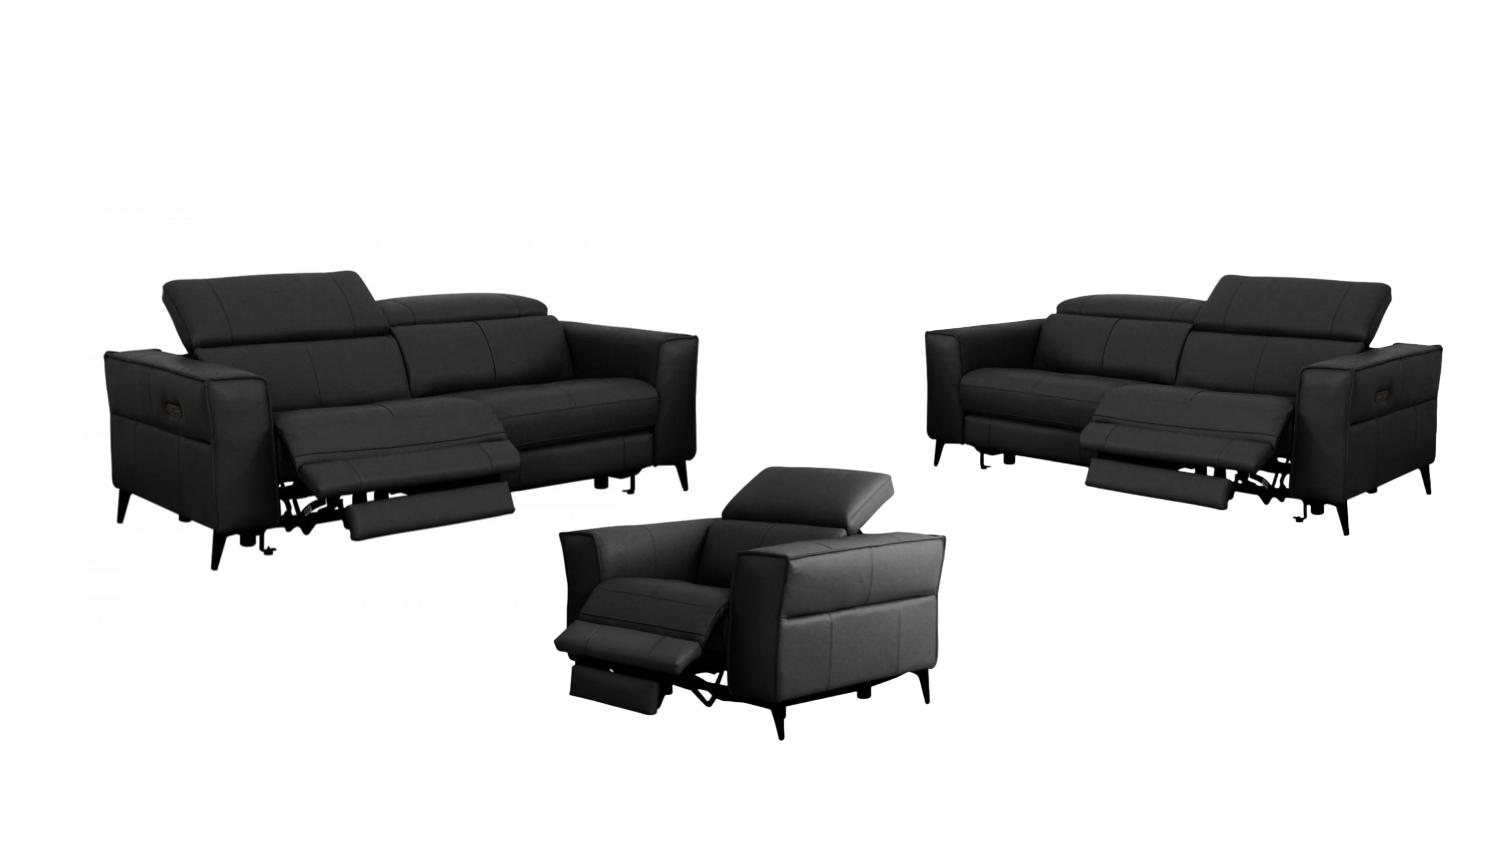 Modern Sofa Loveseat and Chair Set Nella VGKNE9193-BLK-4S-3pcs in Black Leather